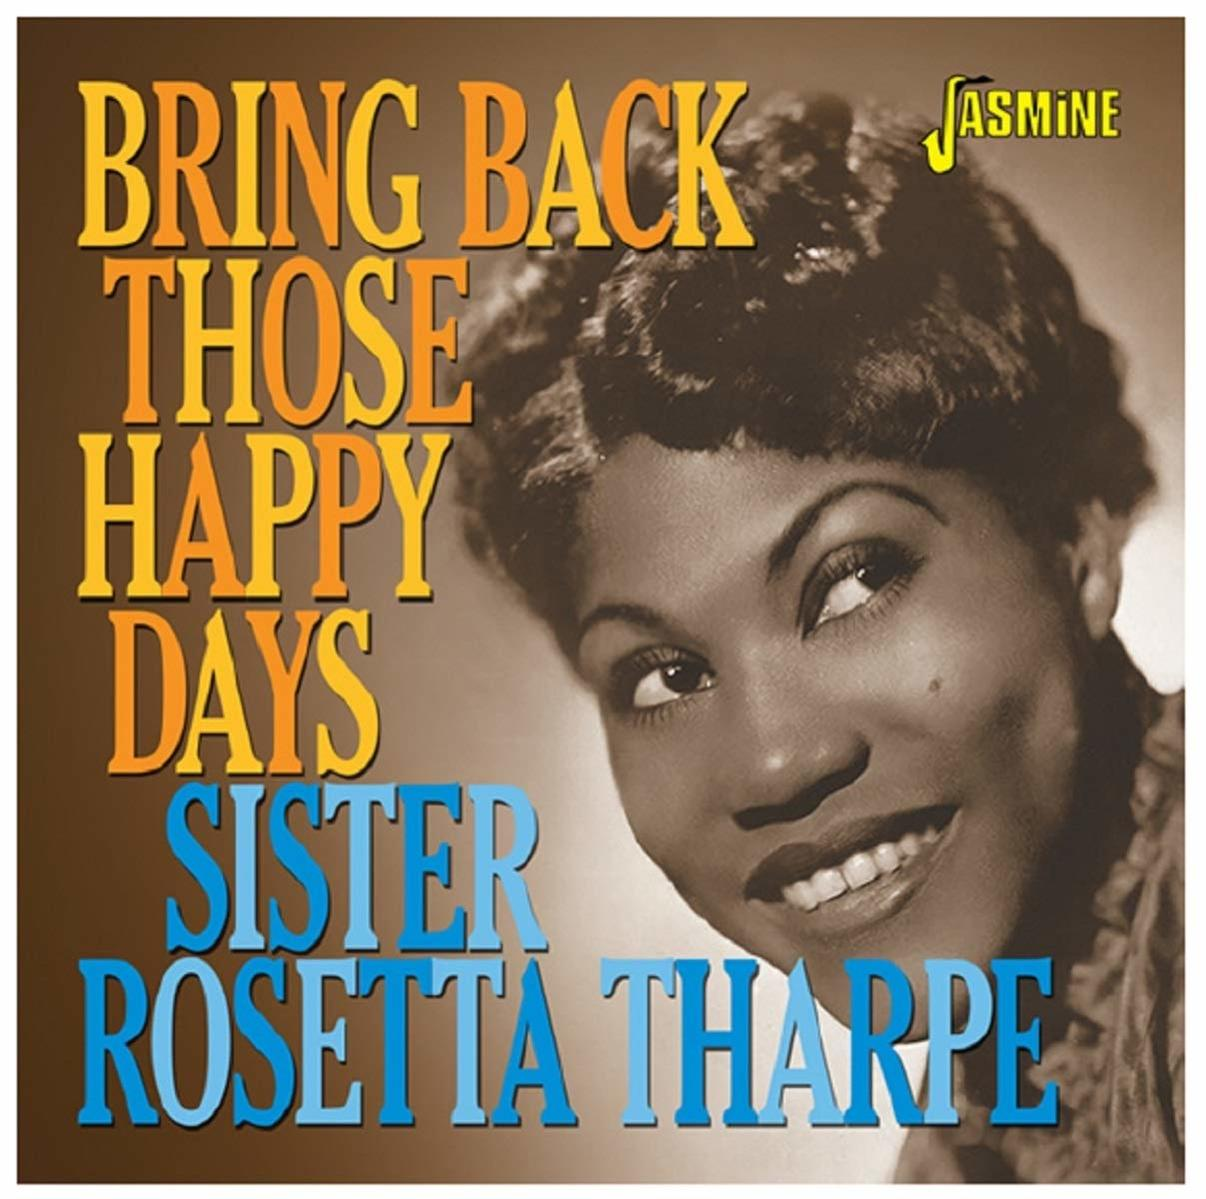 AND SEL DAYS. THOSE GREATEST BACK Tharpe - - Sister BRING HAPPY (CD) Rosetta HITS